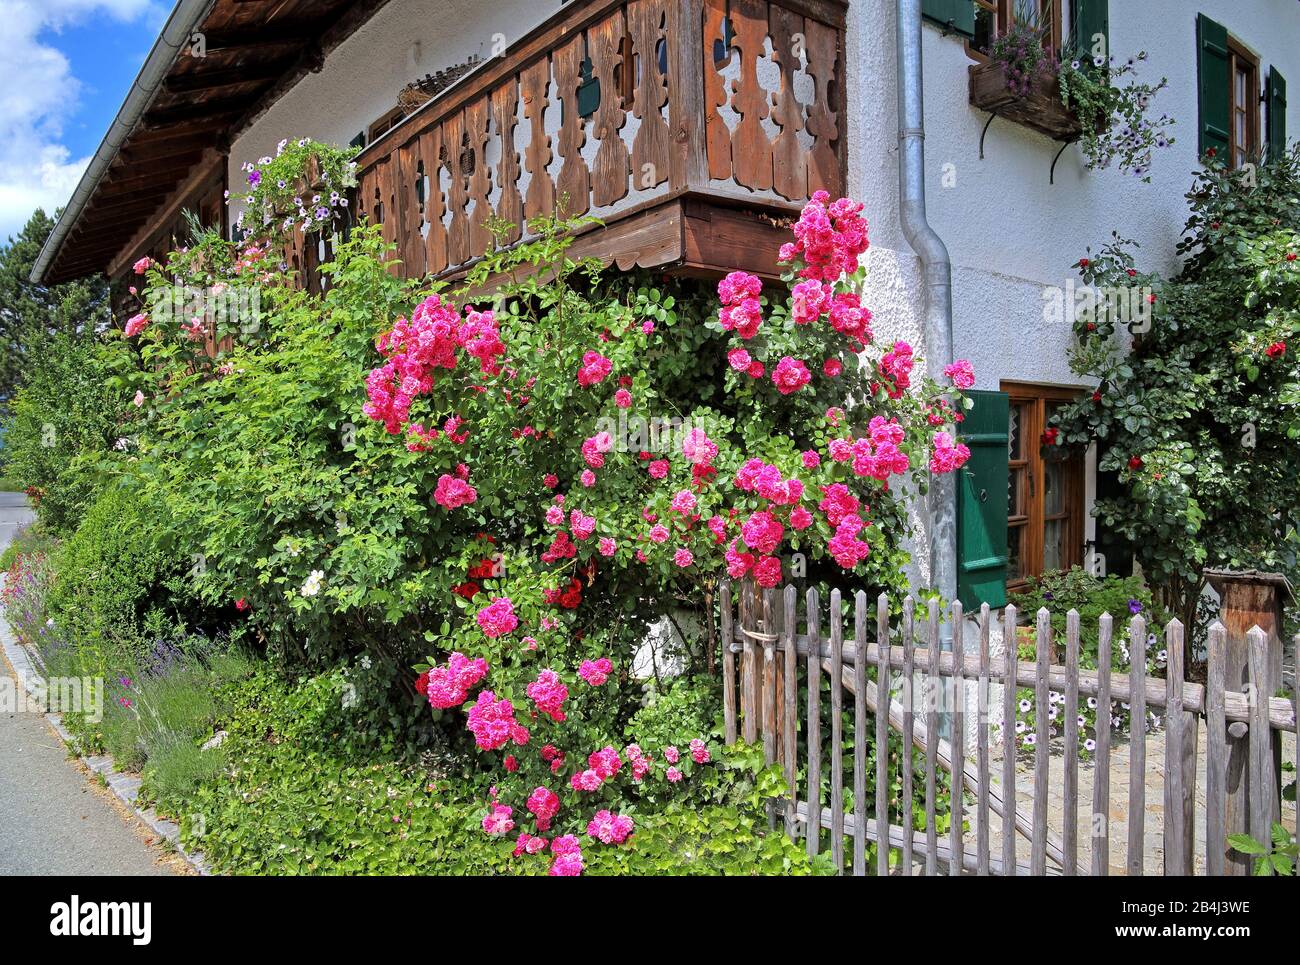 Climbing roses at Upper Bavarian country house in Ohlstadt, Loisachtal, Upper Bavaria, Bavaria, Germany Stock Photo